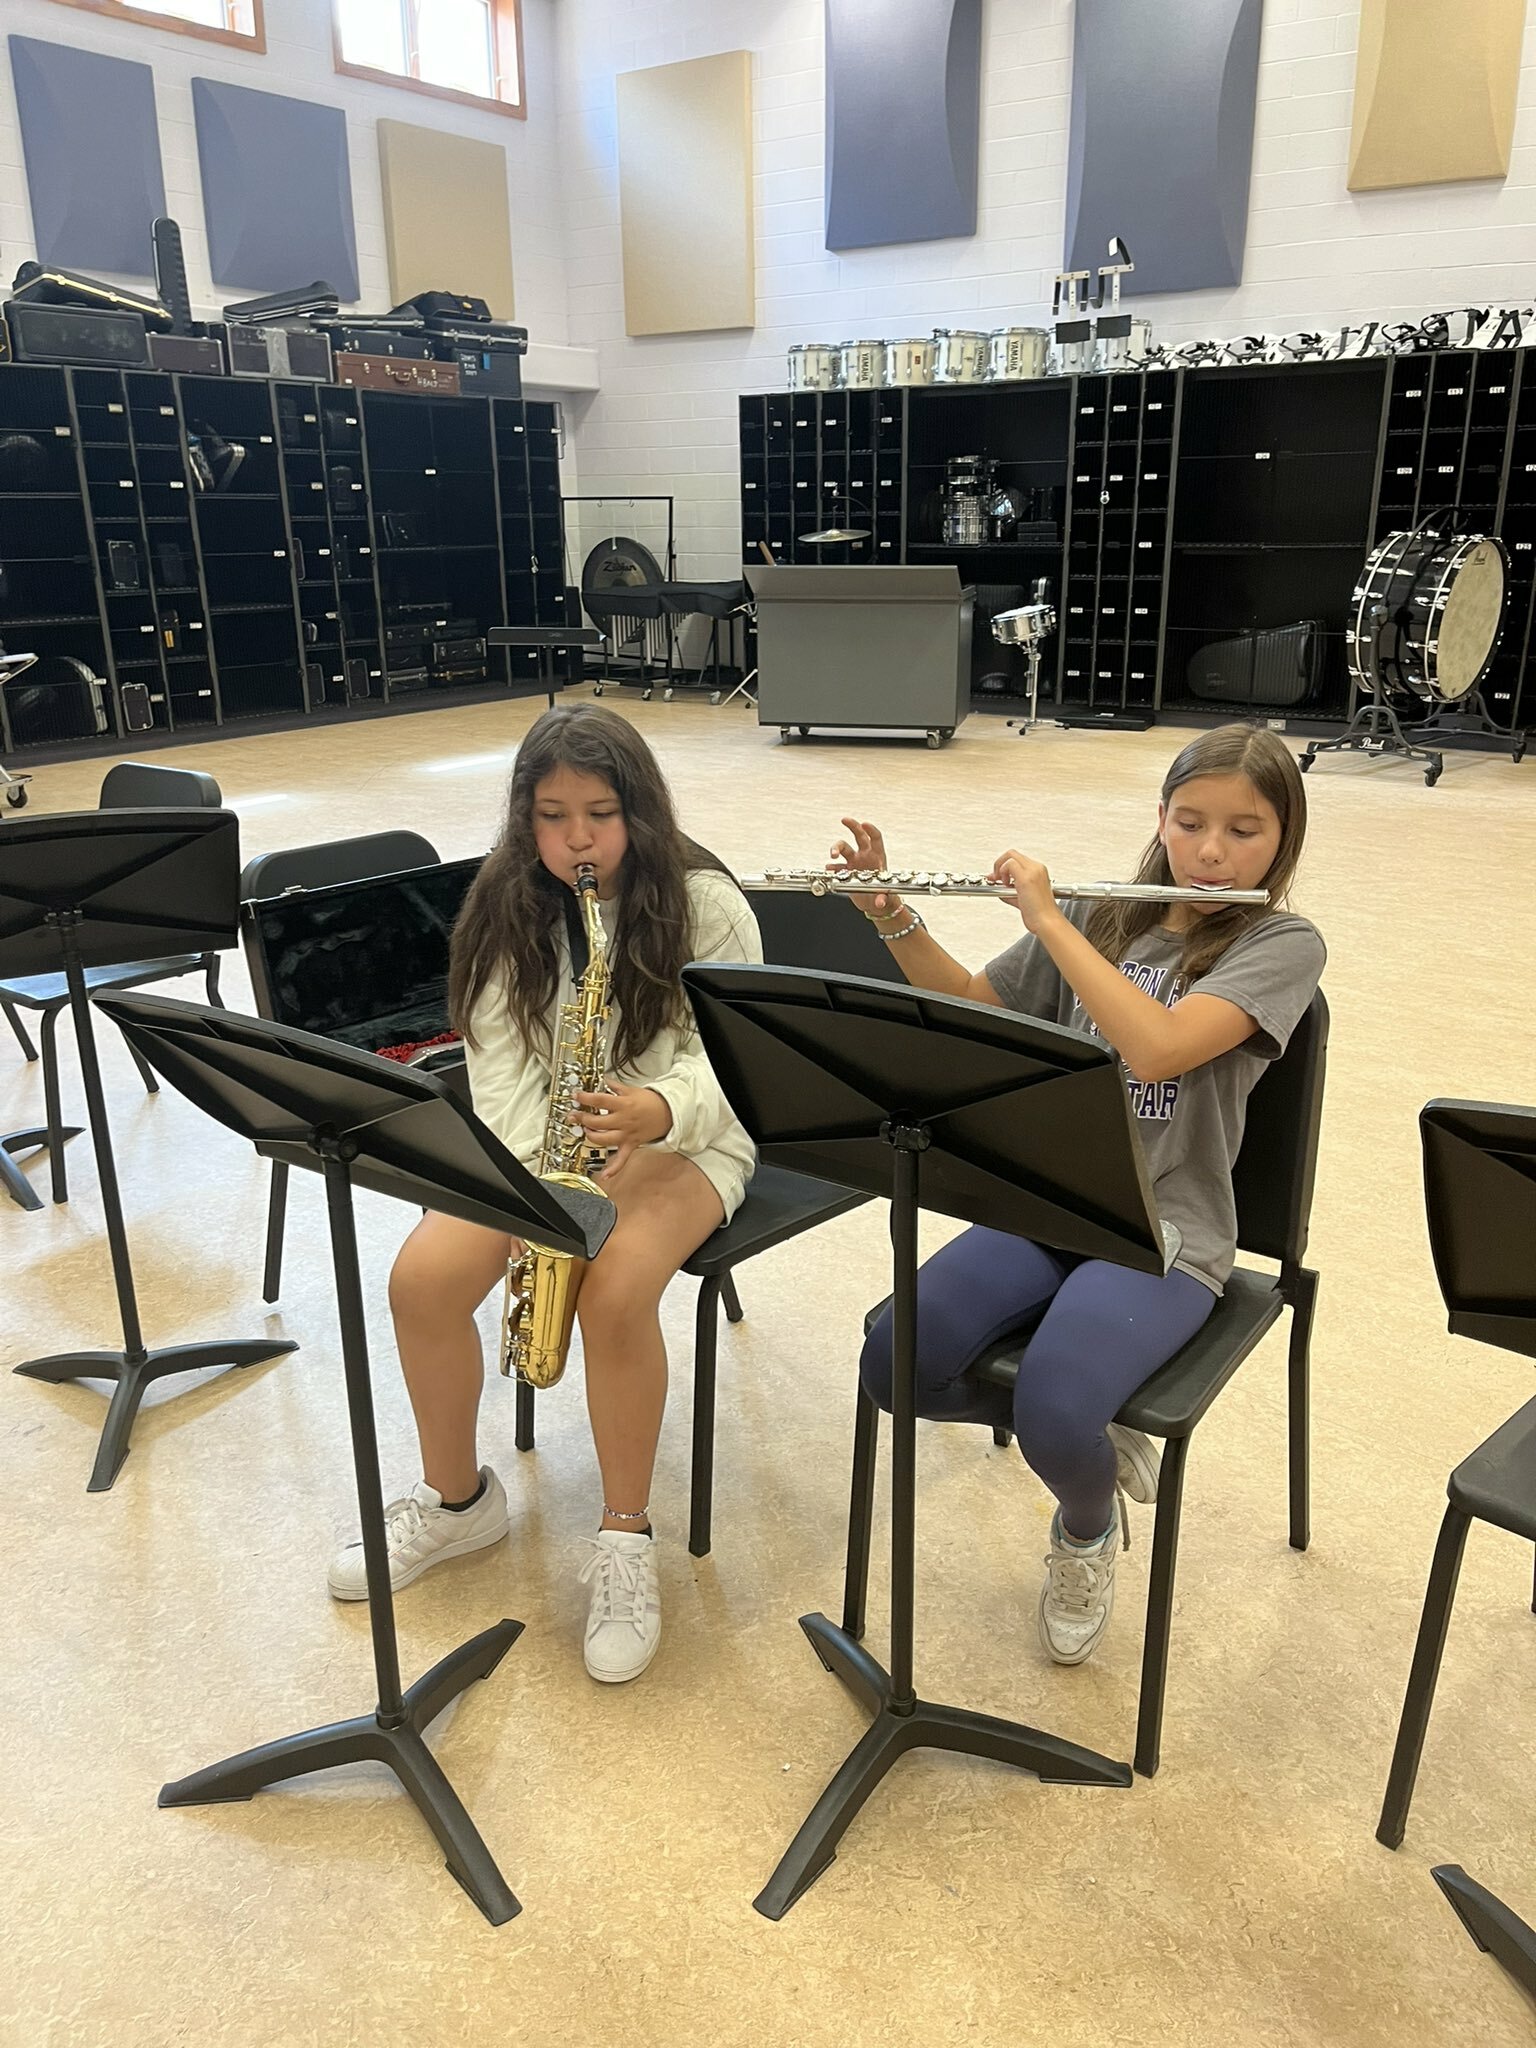 Samantha Alvarado and Olivia Aldrich were among the students who participated in the  Hampton Bays Middle School's Summer Instrumental Music Program in July, which was open to all fifth and sixth graders. The program, available every summer for all beginner band students. 
COURTESY HAMPTON BAYS SCHOOL DISTRICT